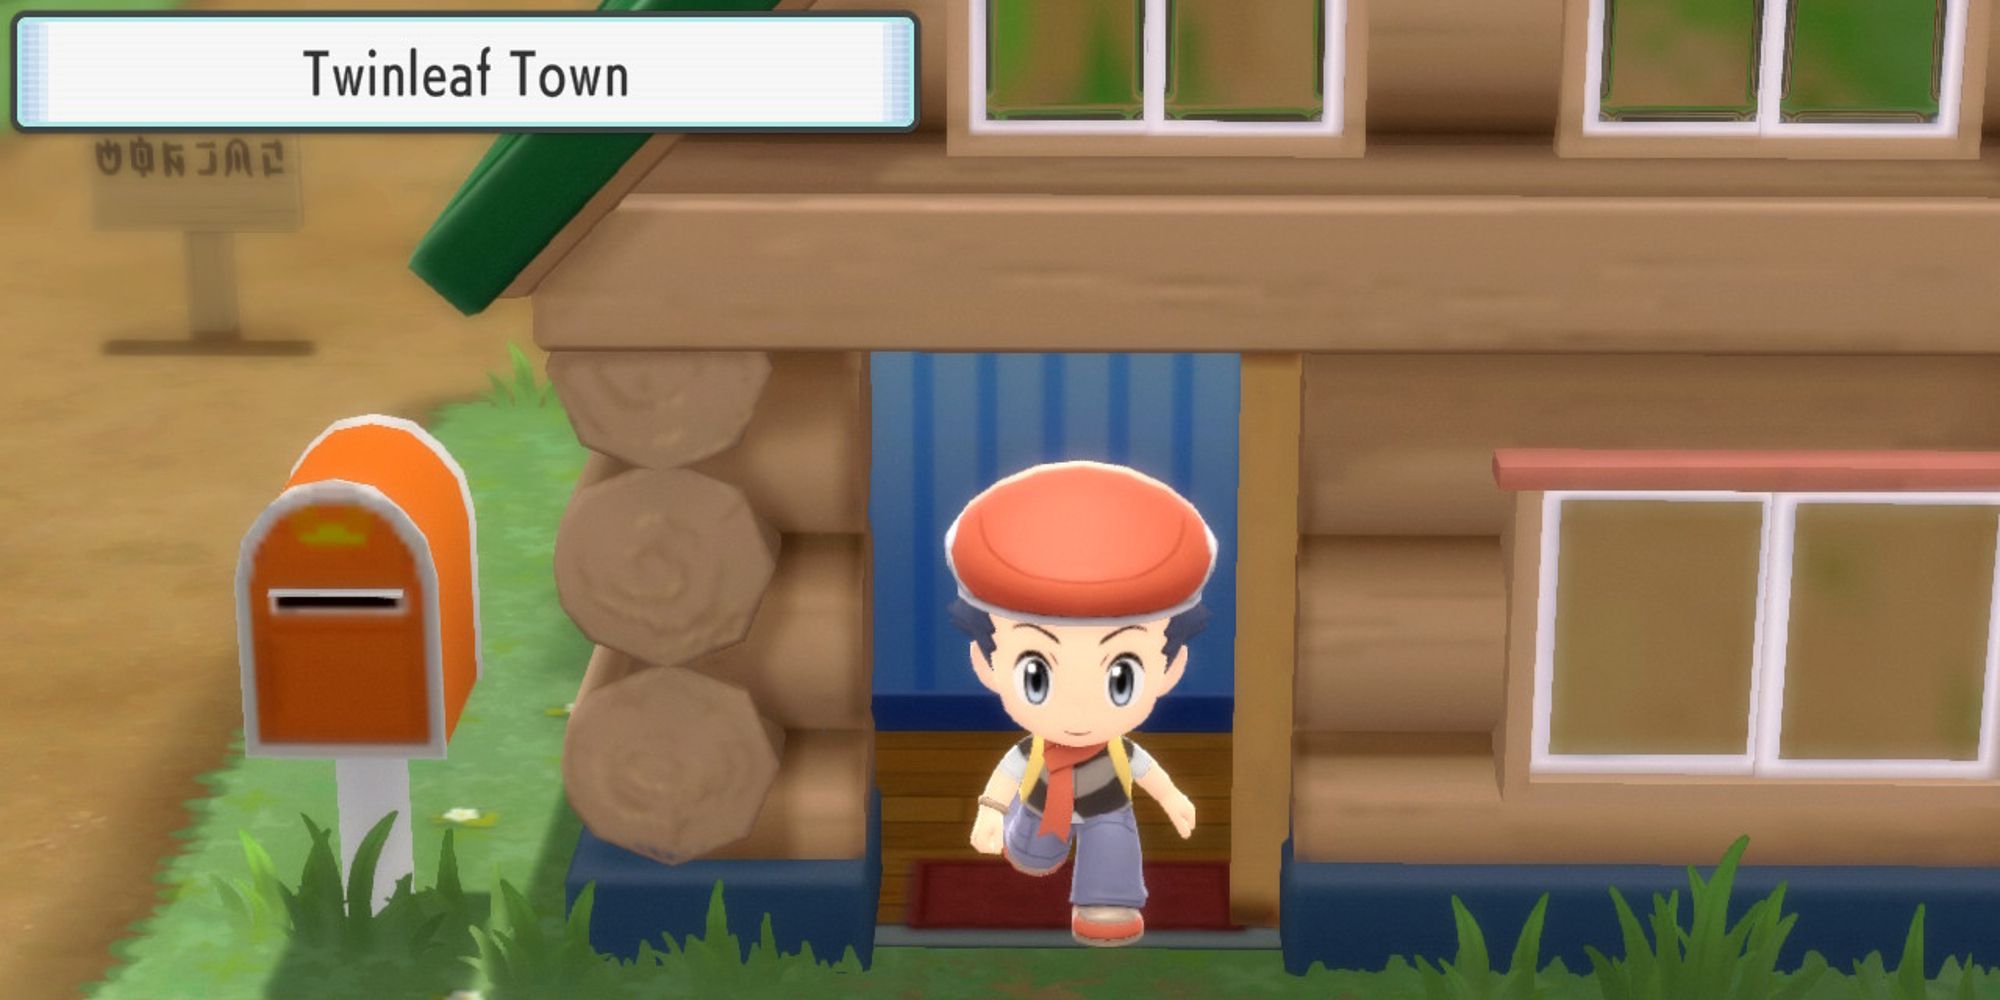 Pokemon BDSP welcomes players back to Twinleaf Town.